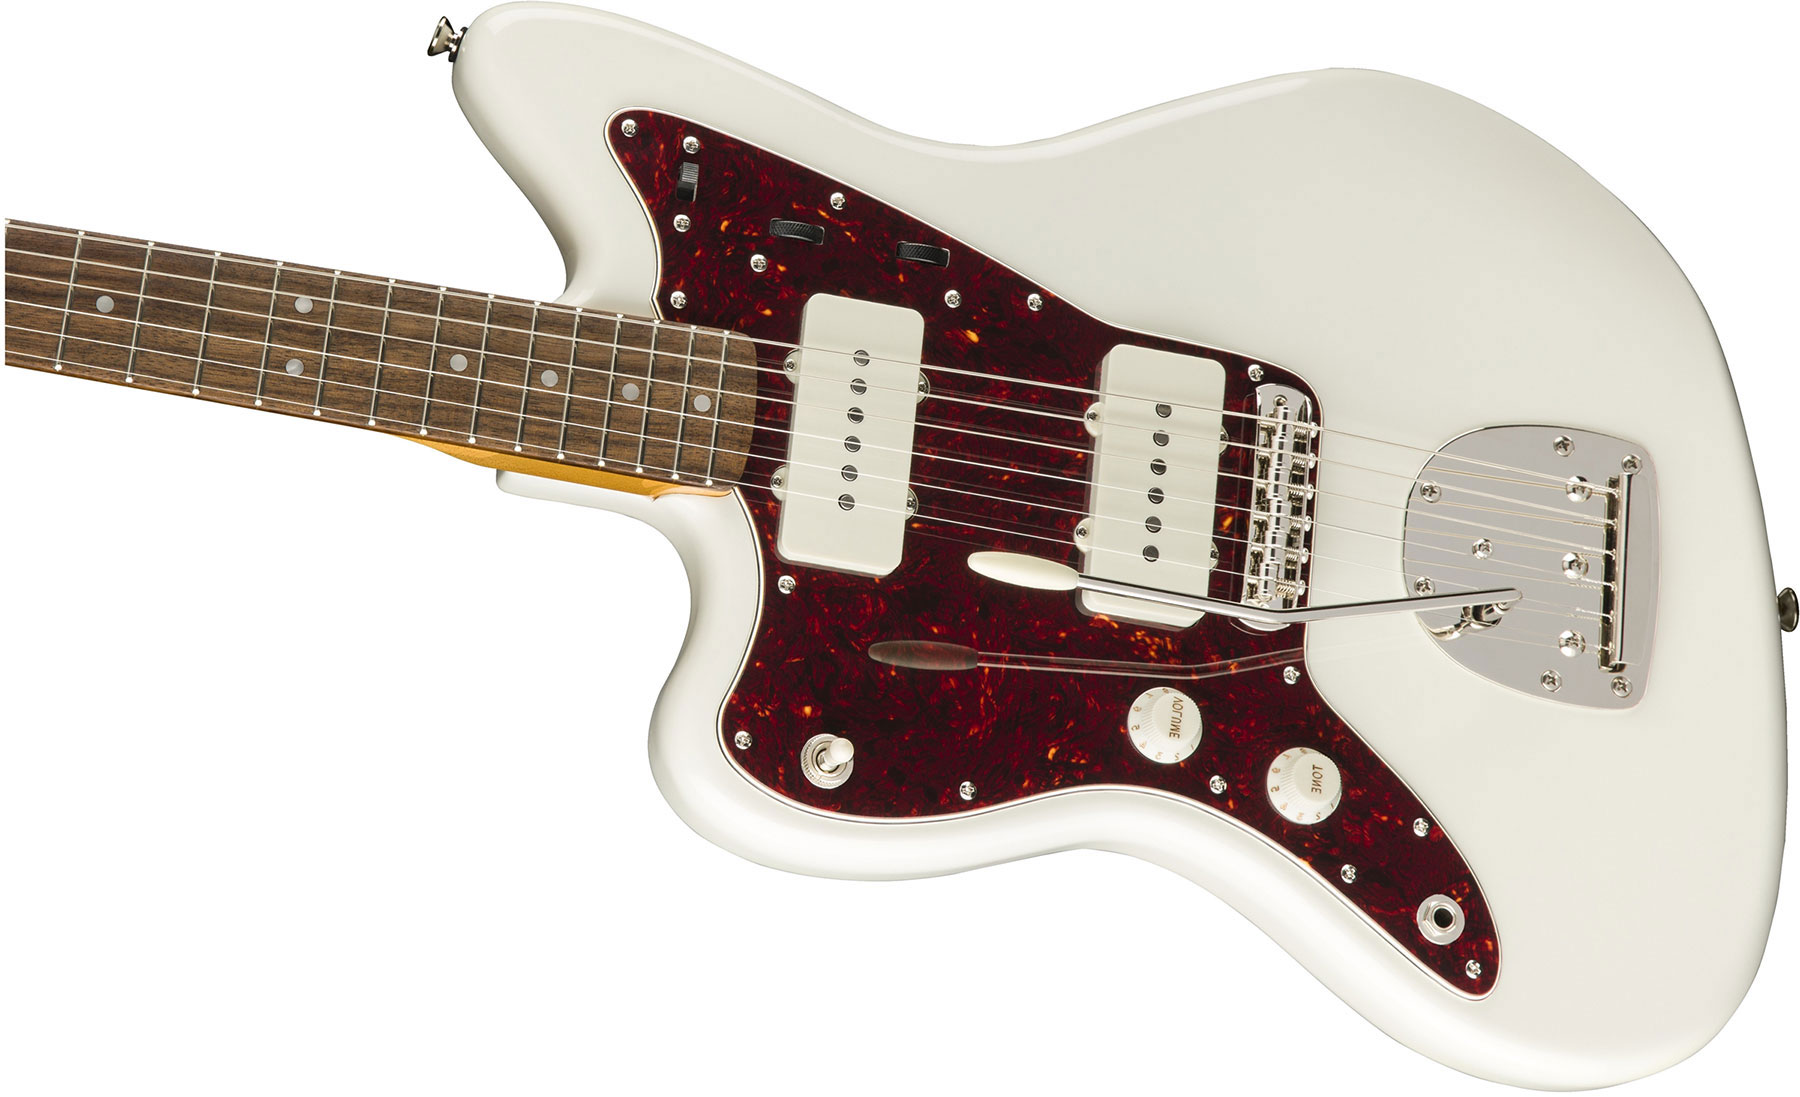 Squier Jazzmaster Classic Vibe 60s 2019 Lh Gaucher Lau - Olympic White - Left-handed electric guitar - Variation 2